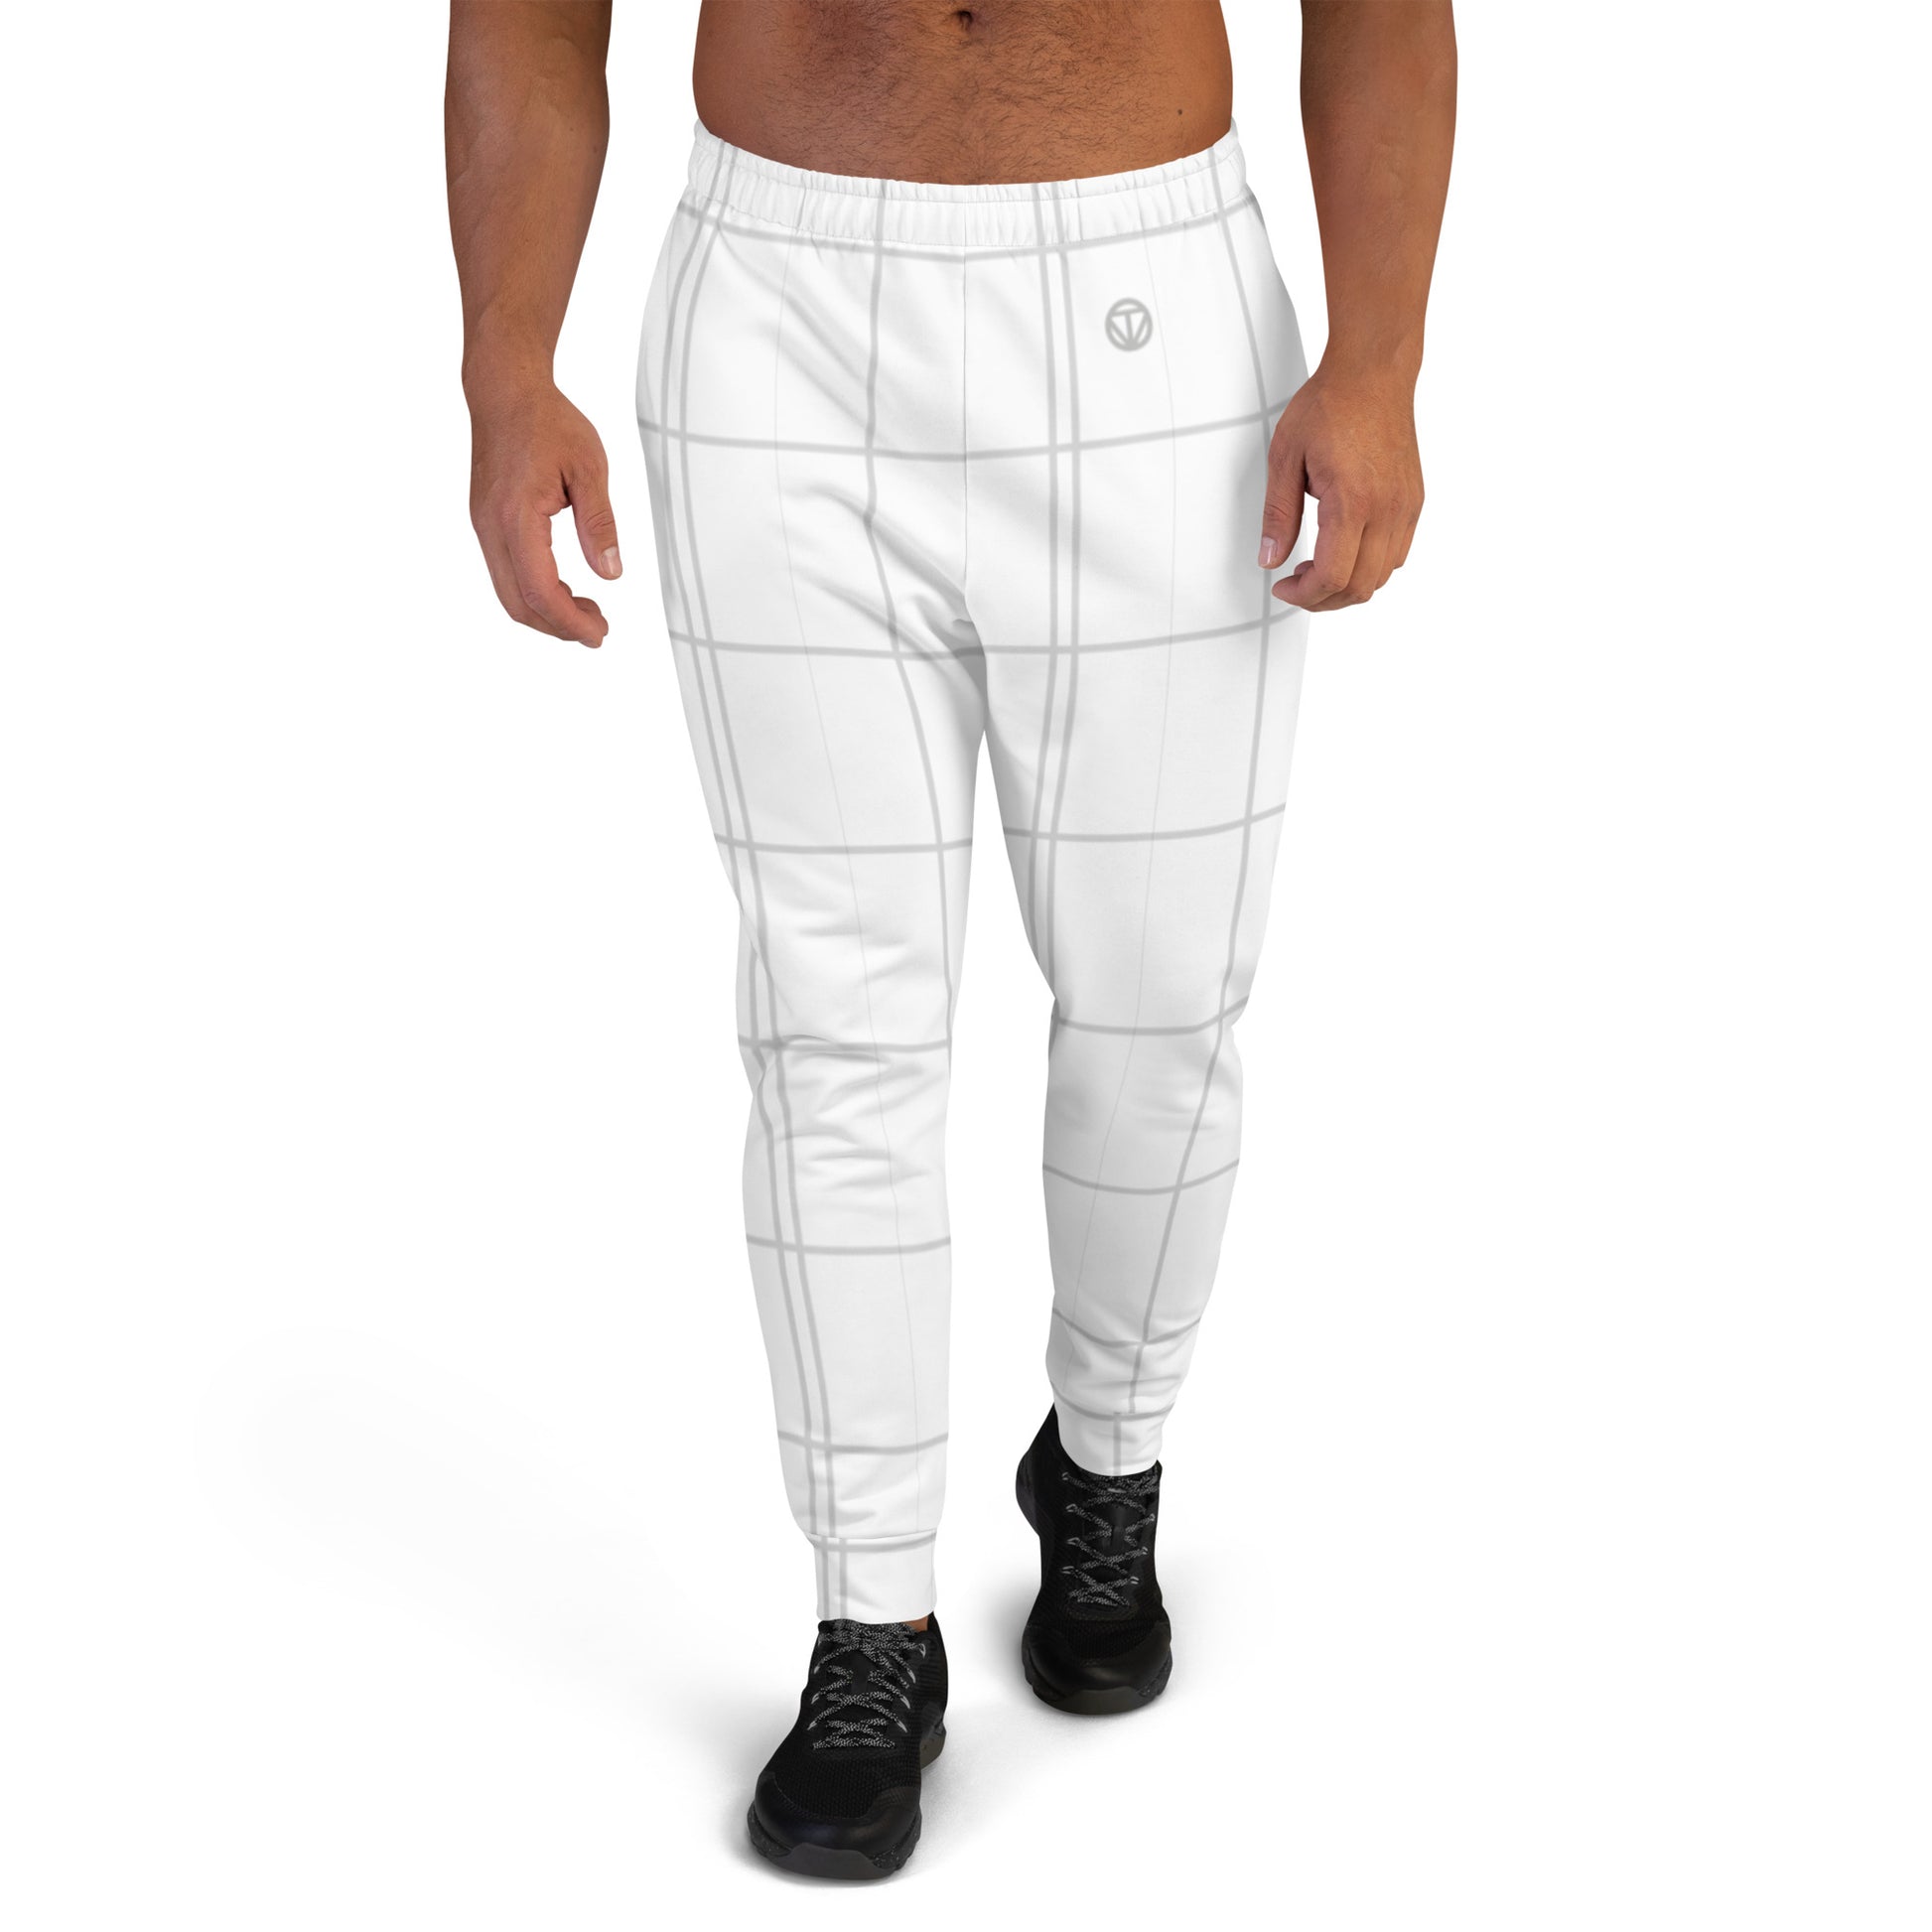 TIME OF VIBES - Men's Joggers LINEUP (White) - €69.00